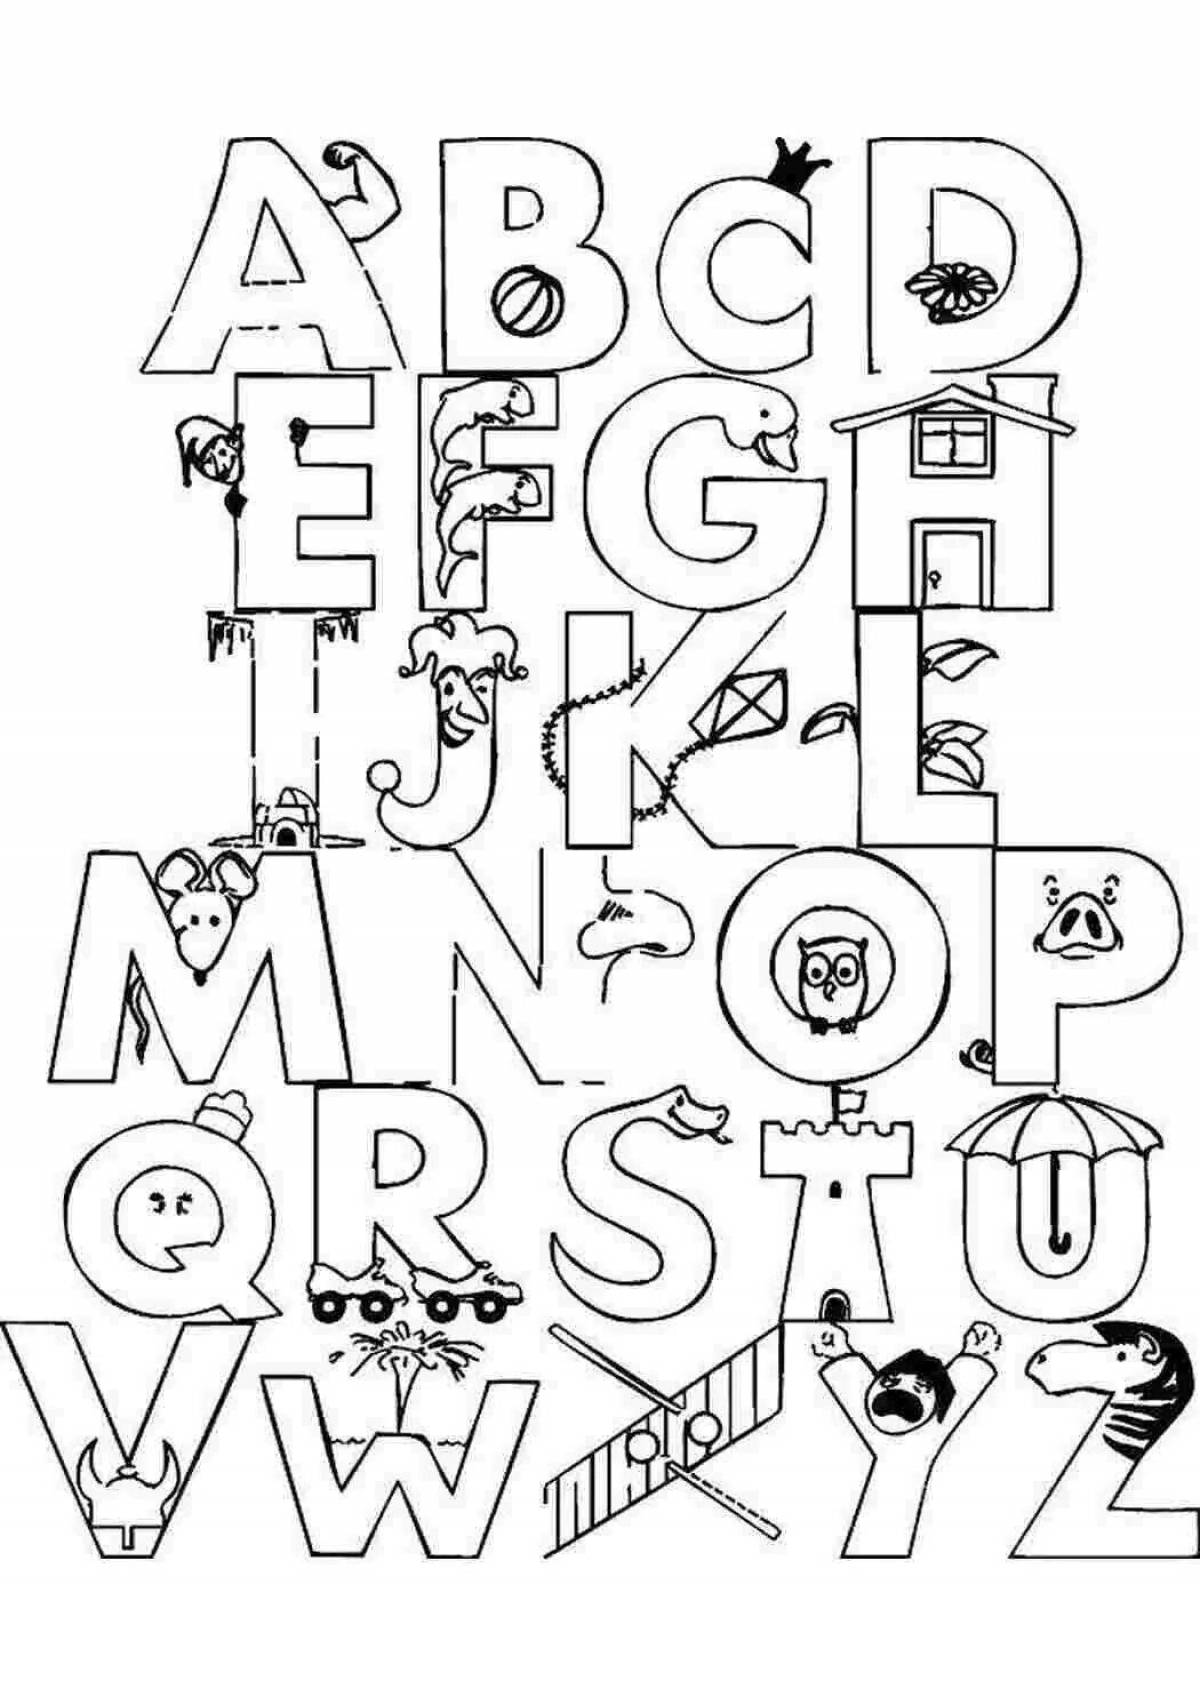 Colorful english alphabet coloring page for kids of all backgrounds